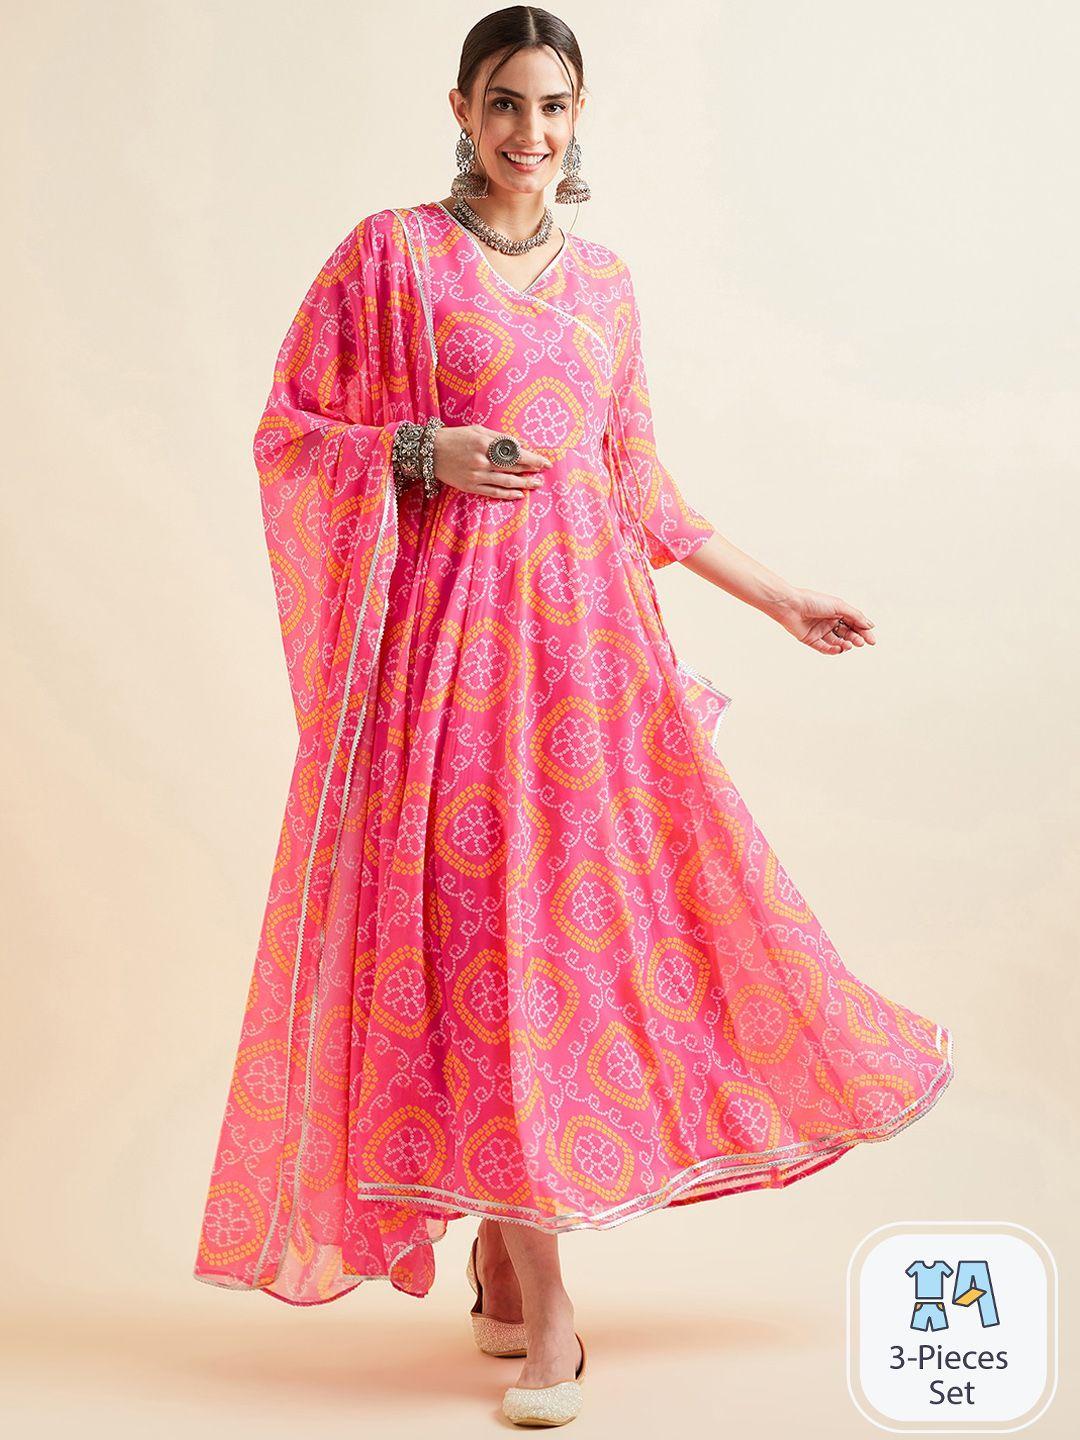 panit pink printed georgette angrakha ethnic dress with dupatta